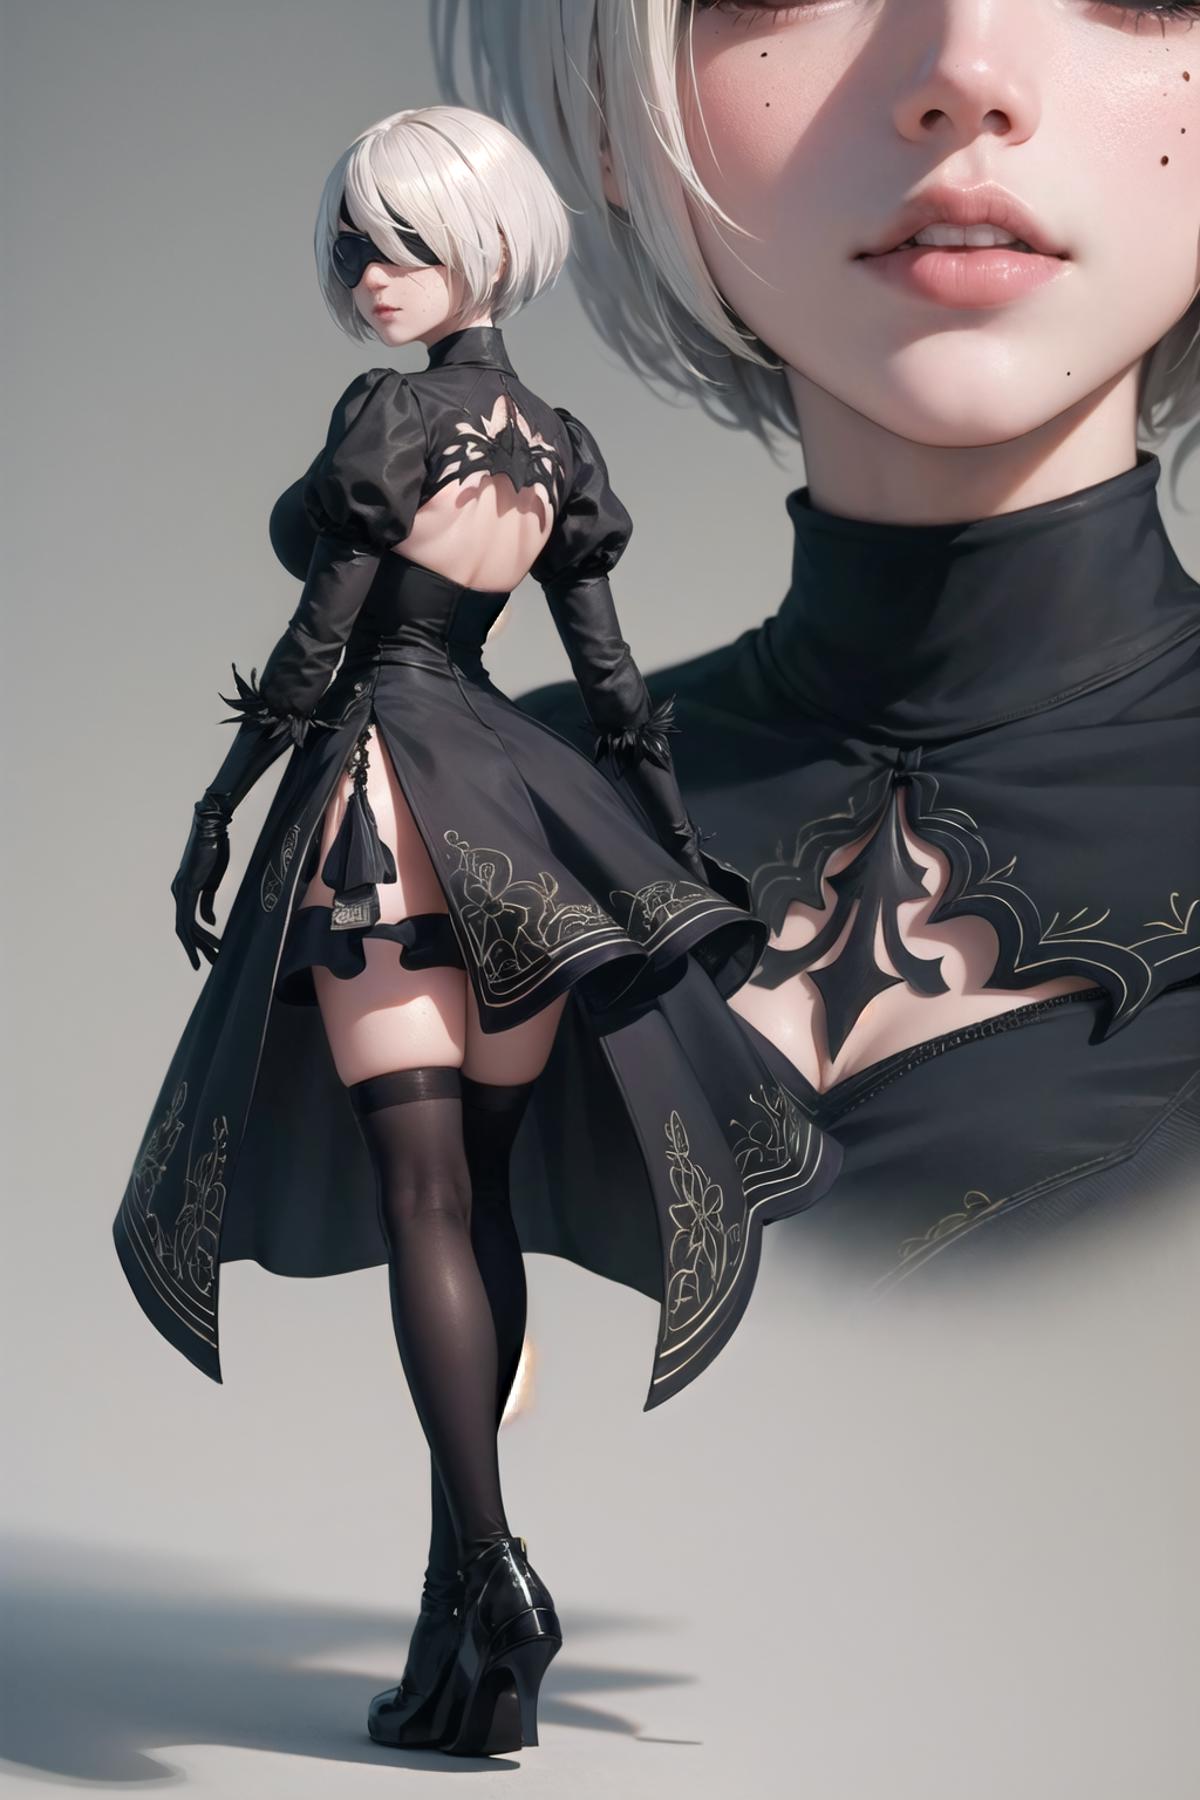 2B | Nier Automata image by wrench1815